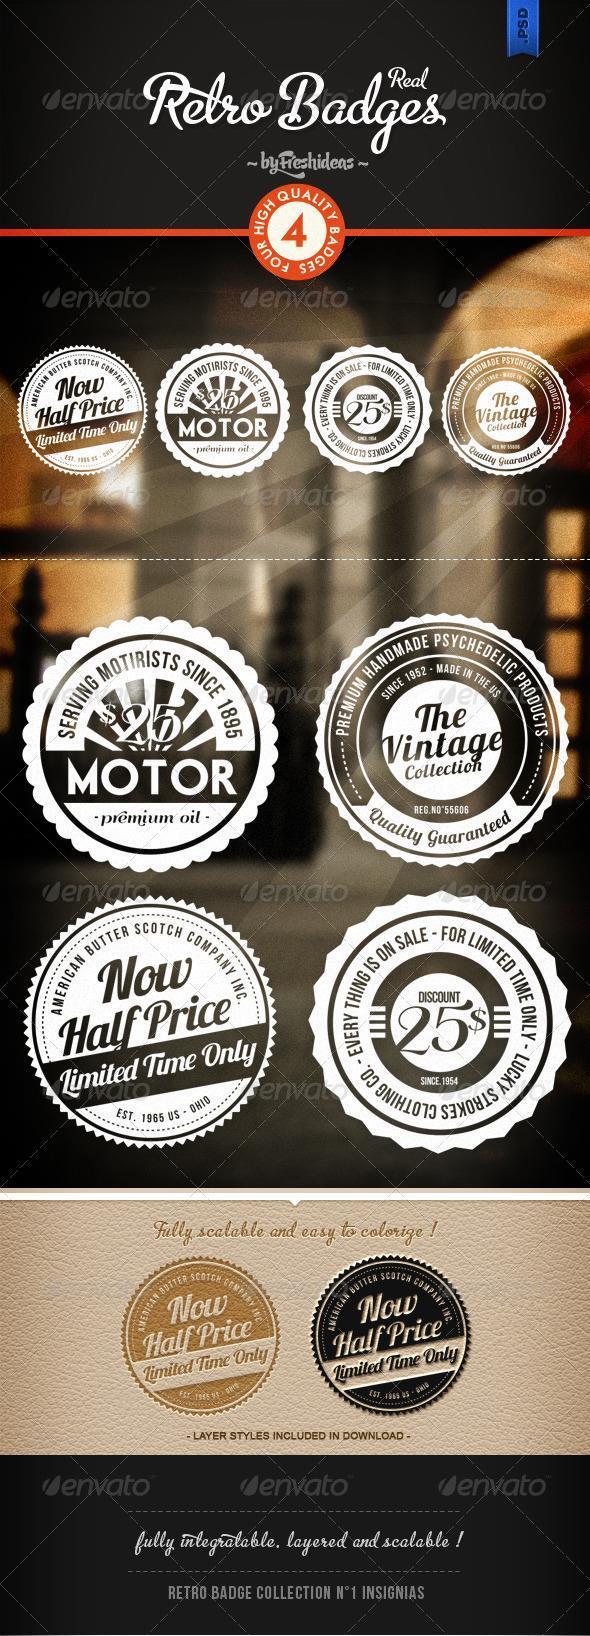 Round Retro Badges and Labels PSD Layered